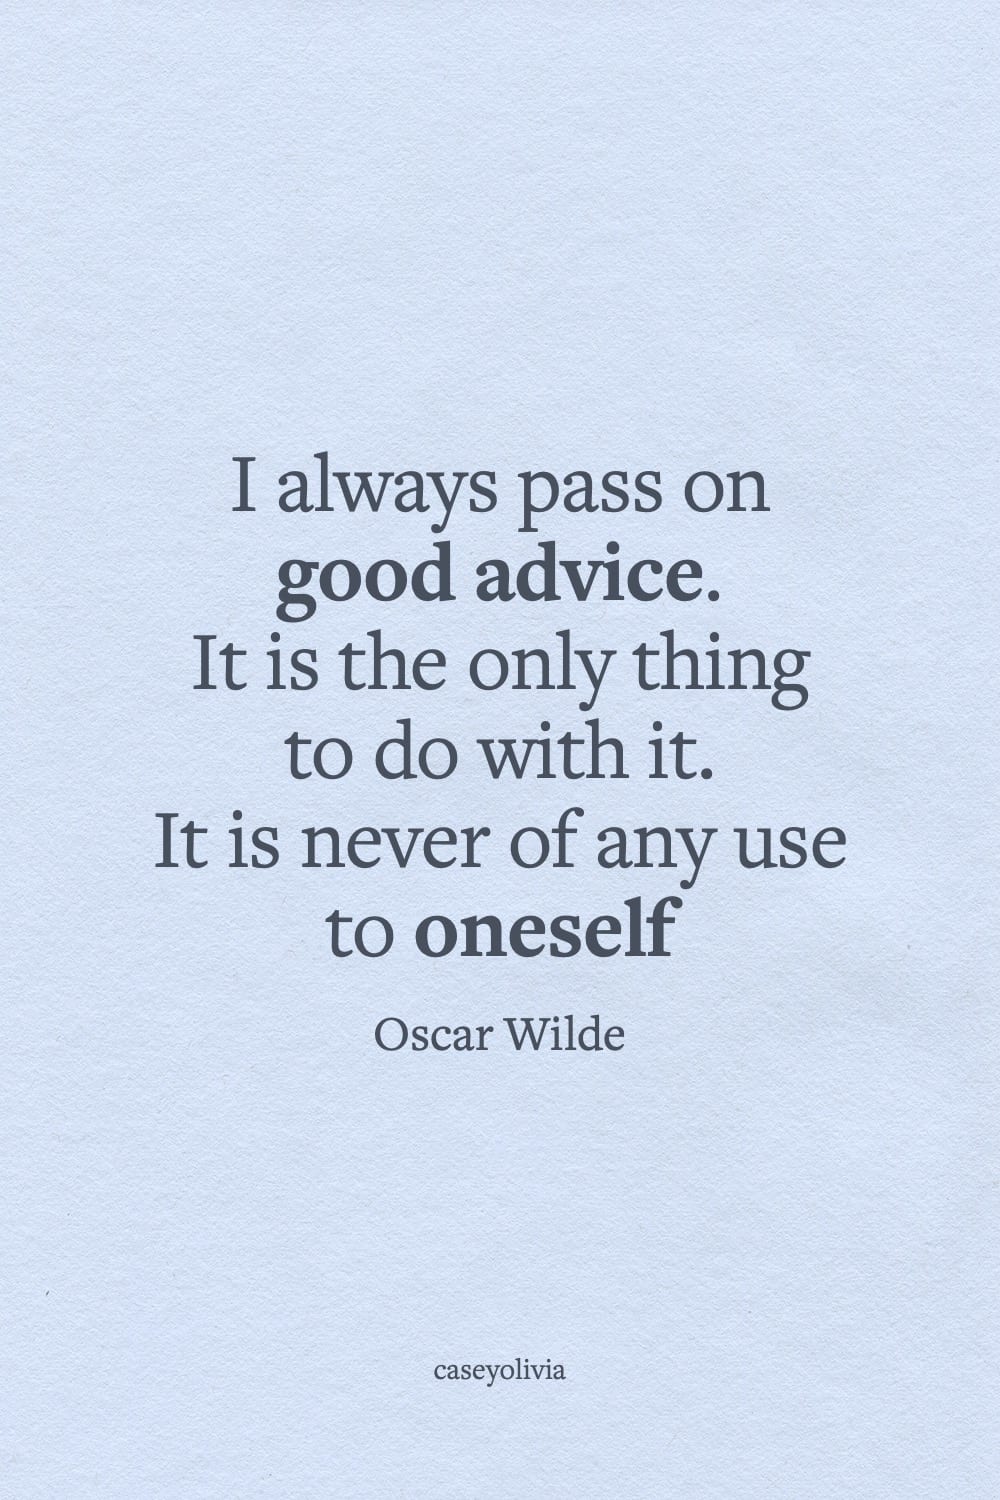 pass on good advice funny life quote image